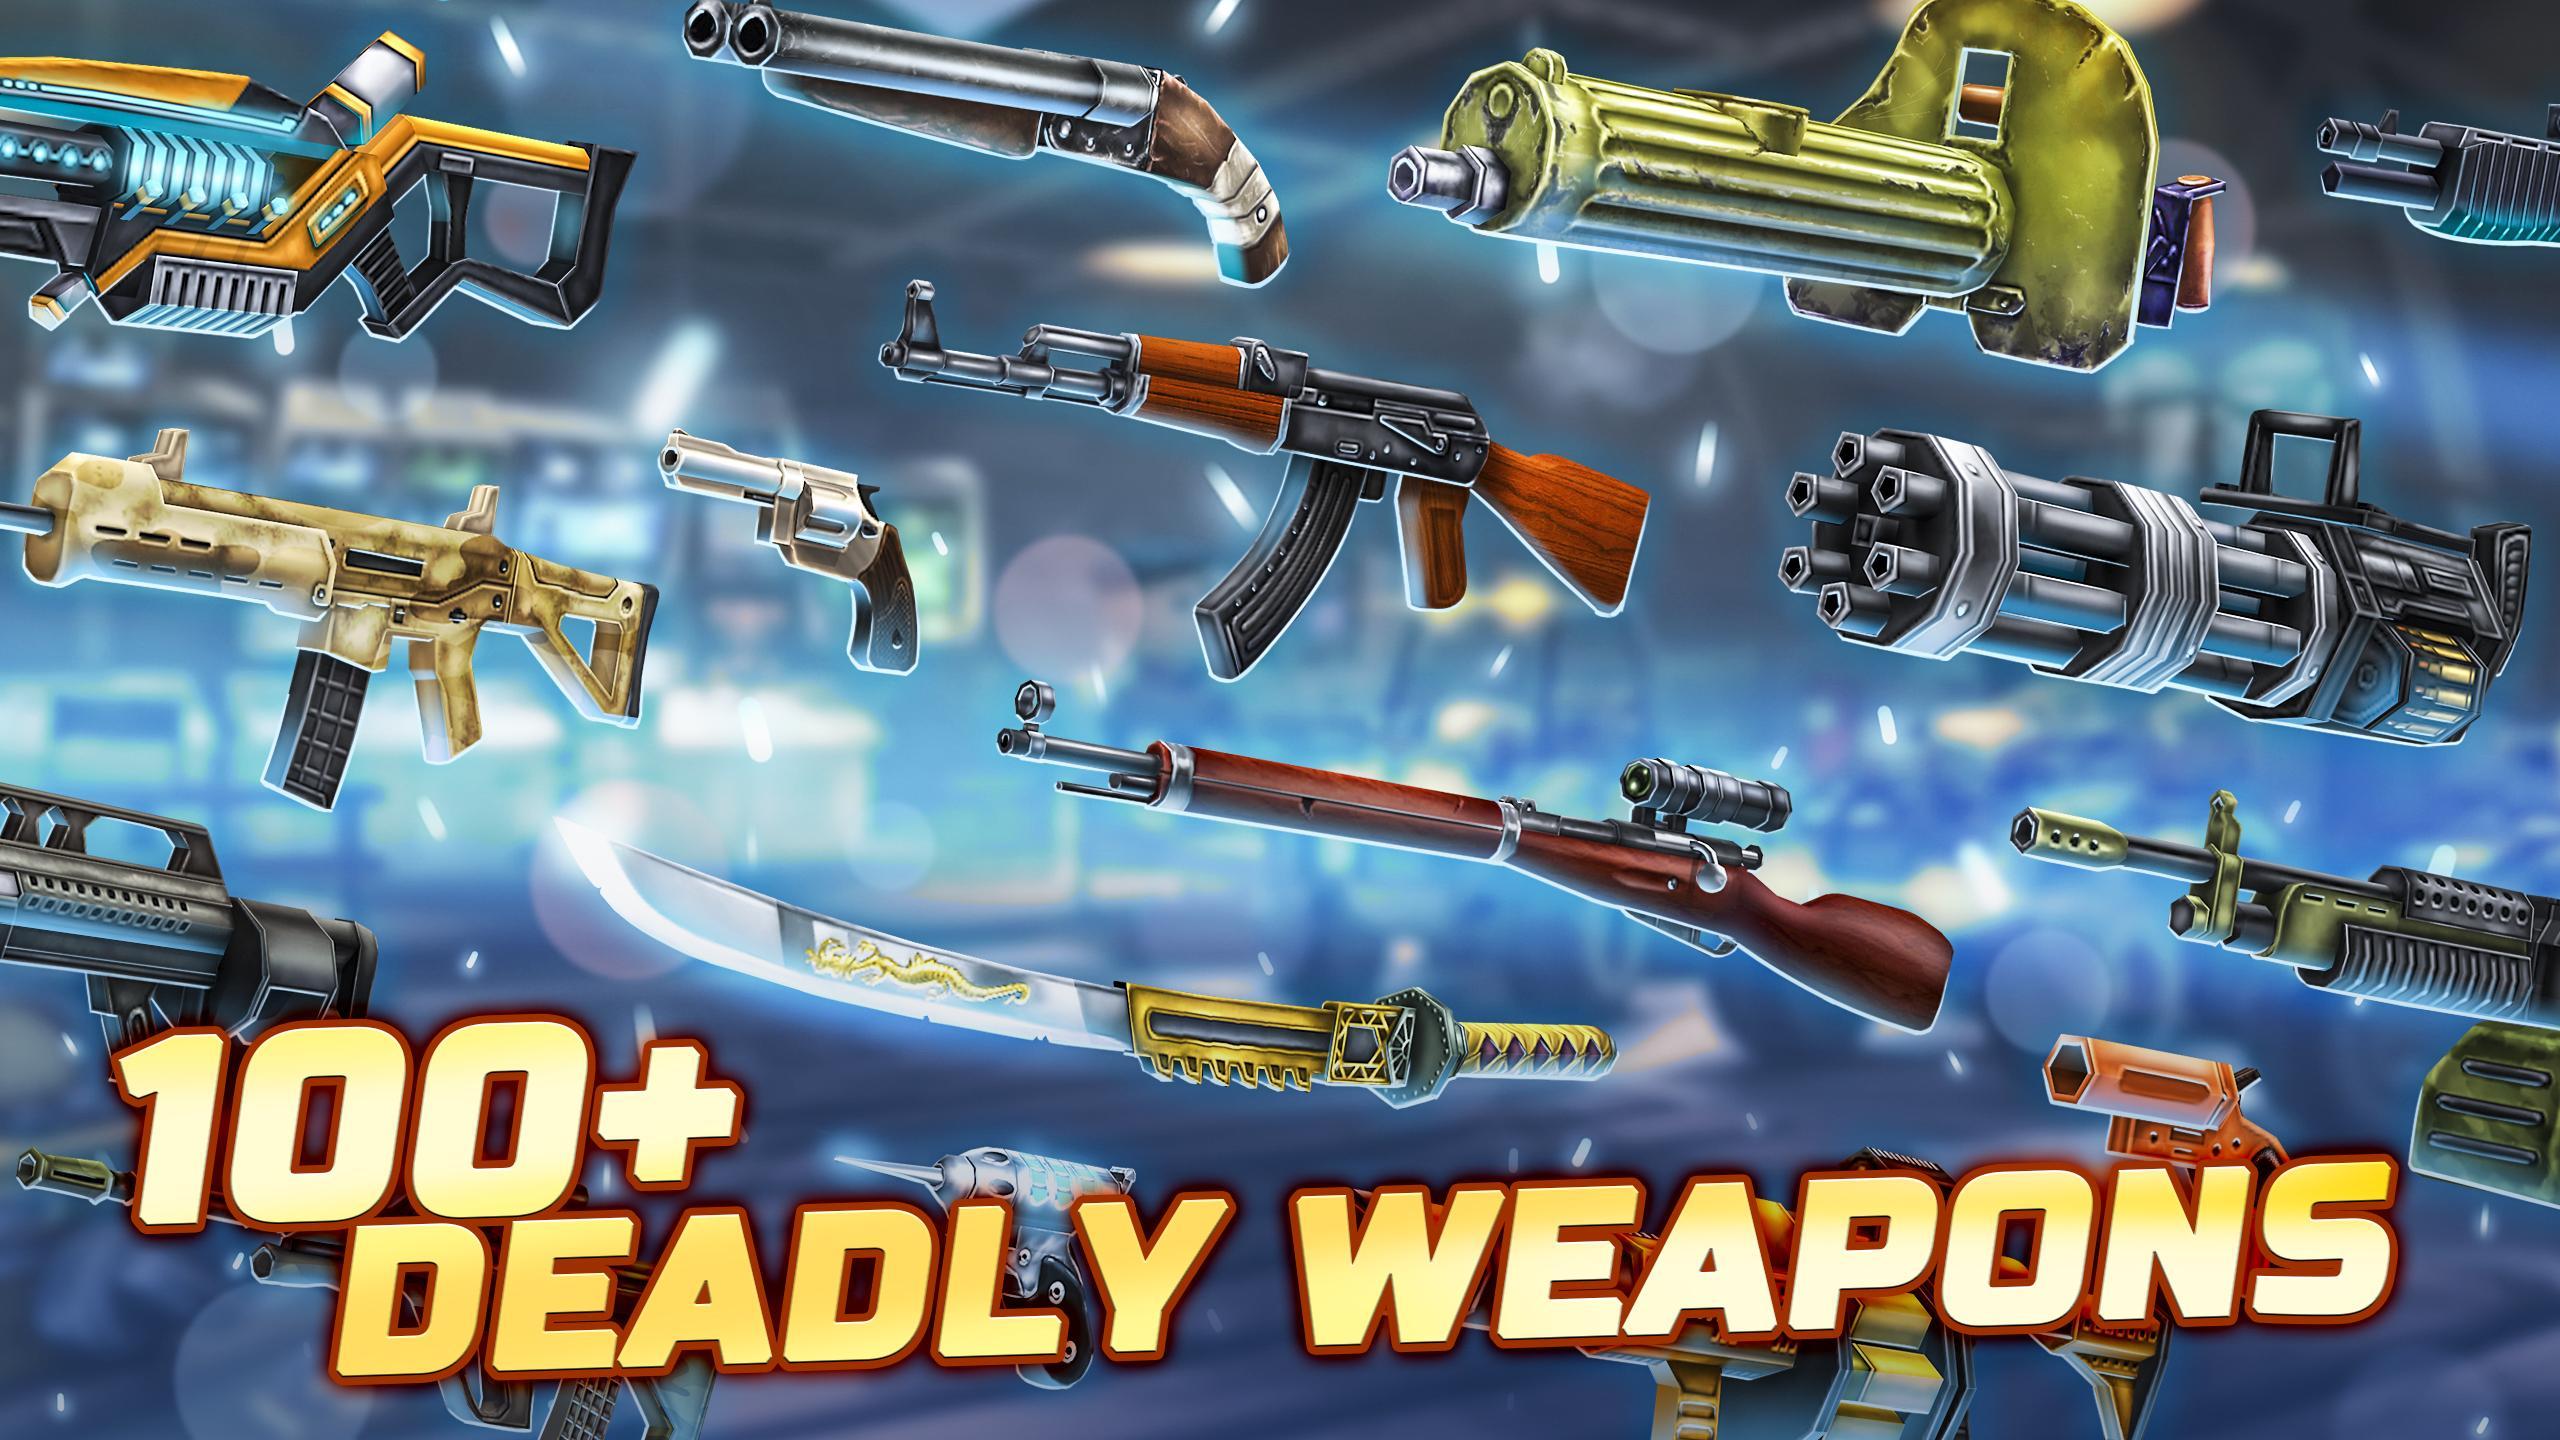 Pocket Troops for Android - APK Download - 